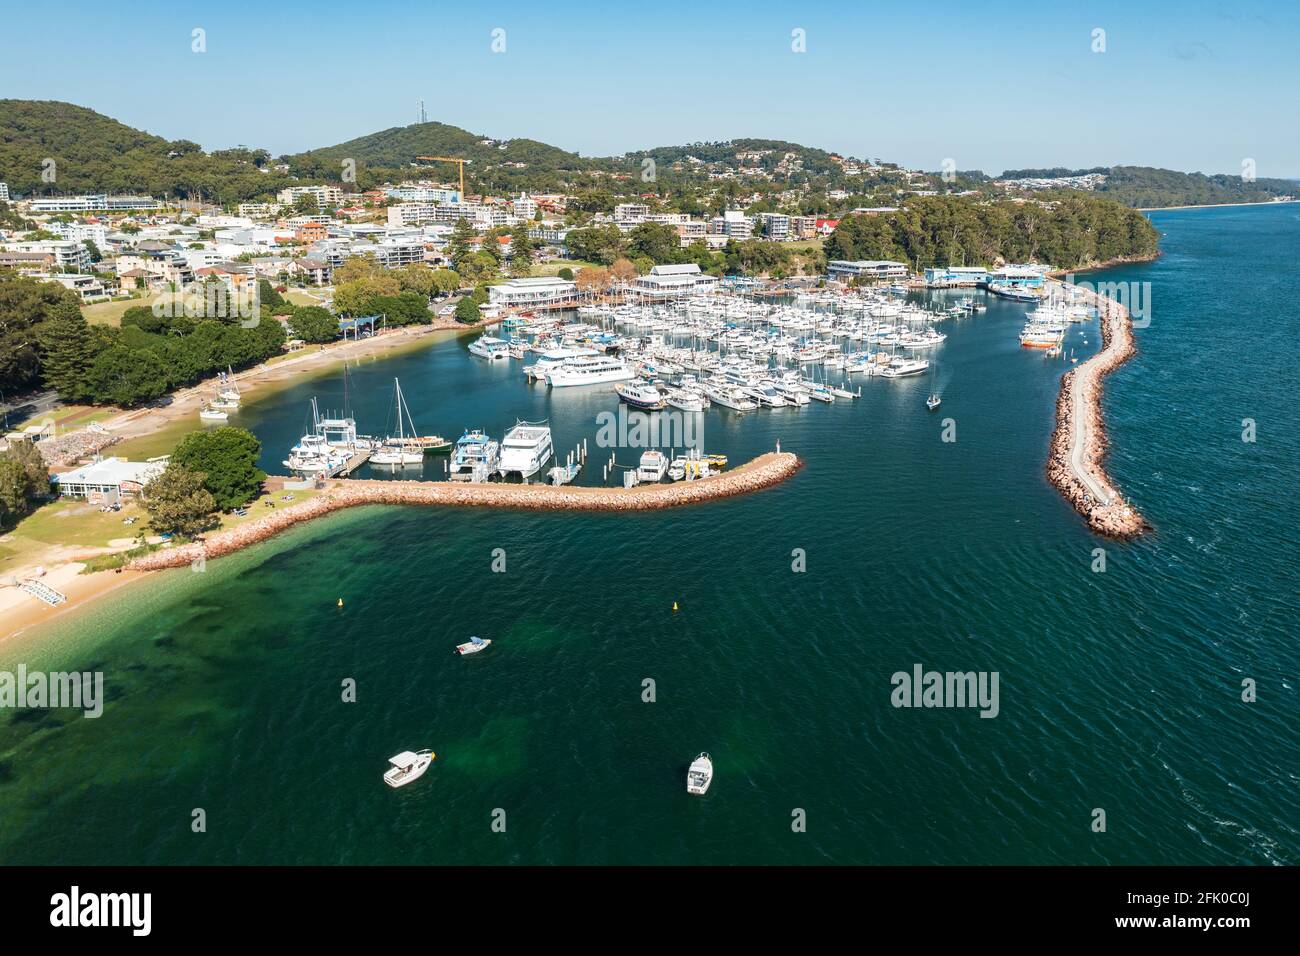 Aerial view of Nelson Bay marina, breakwater, and town, with the aqua waters of Port Stephens, Australia. Stock Photo